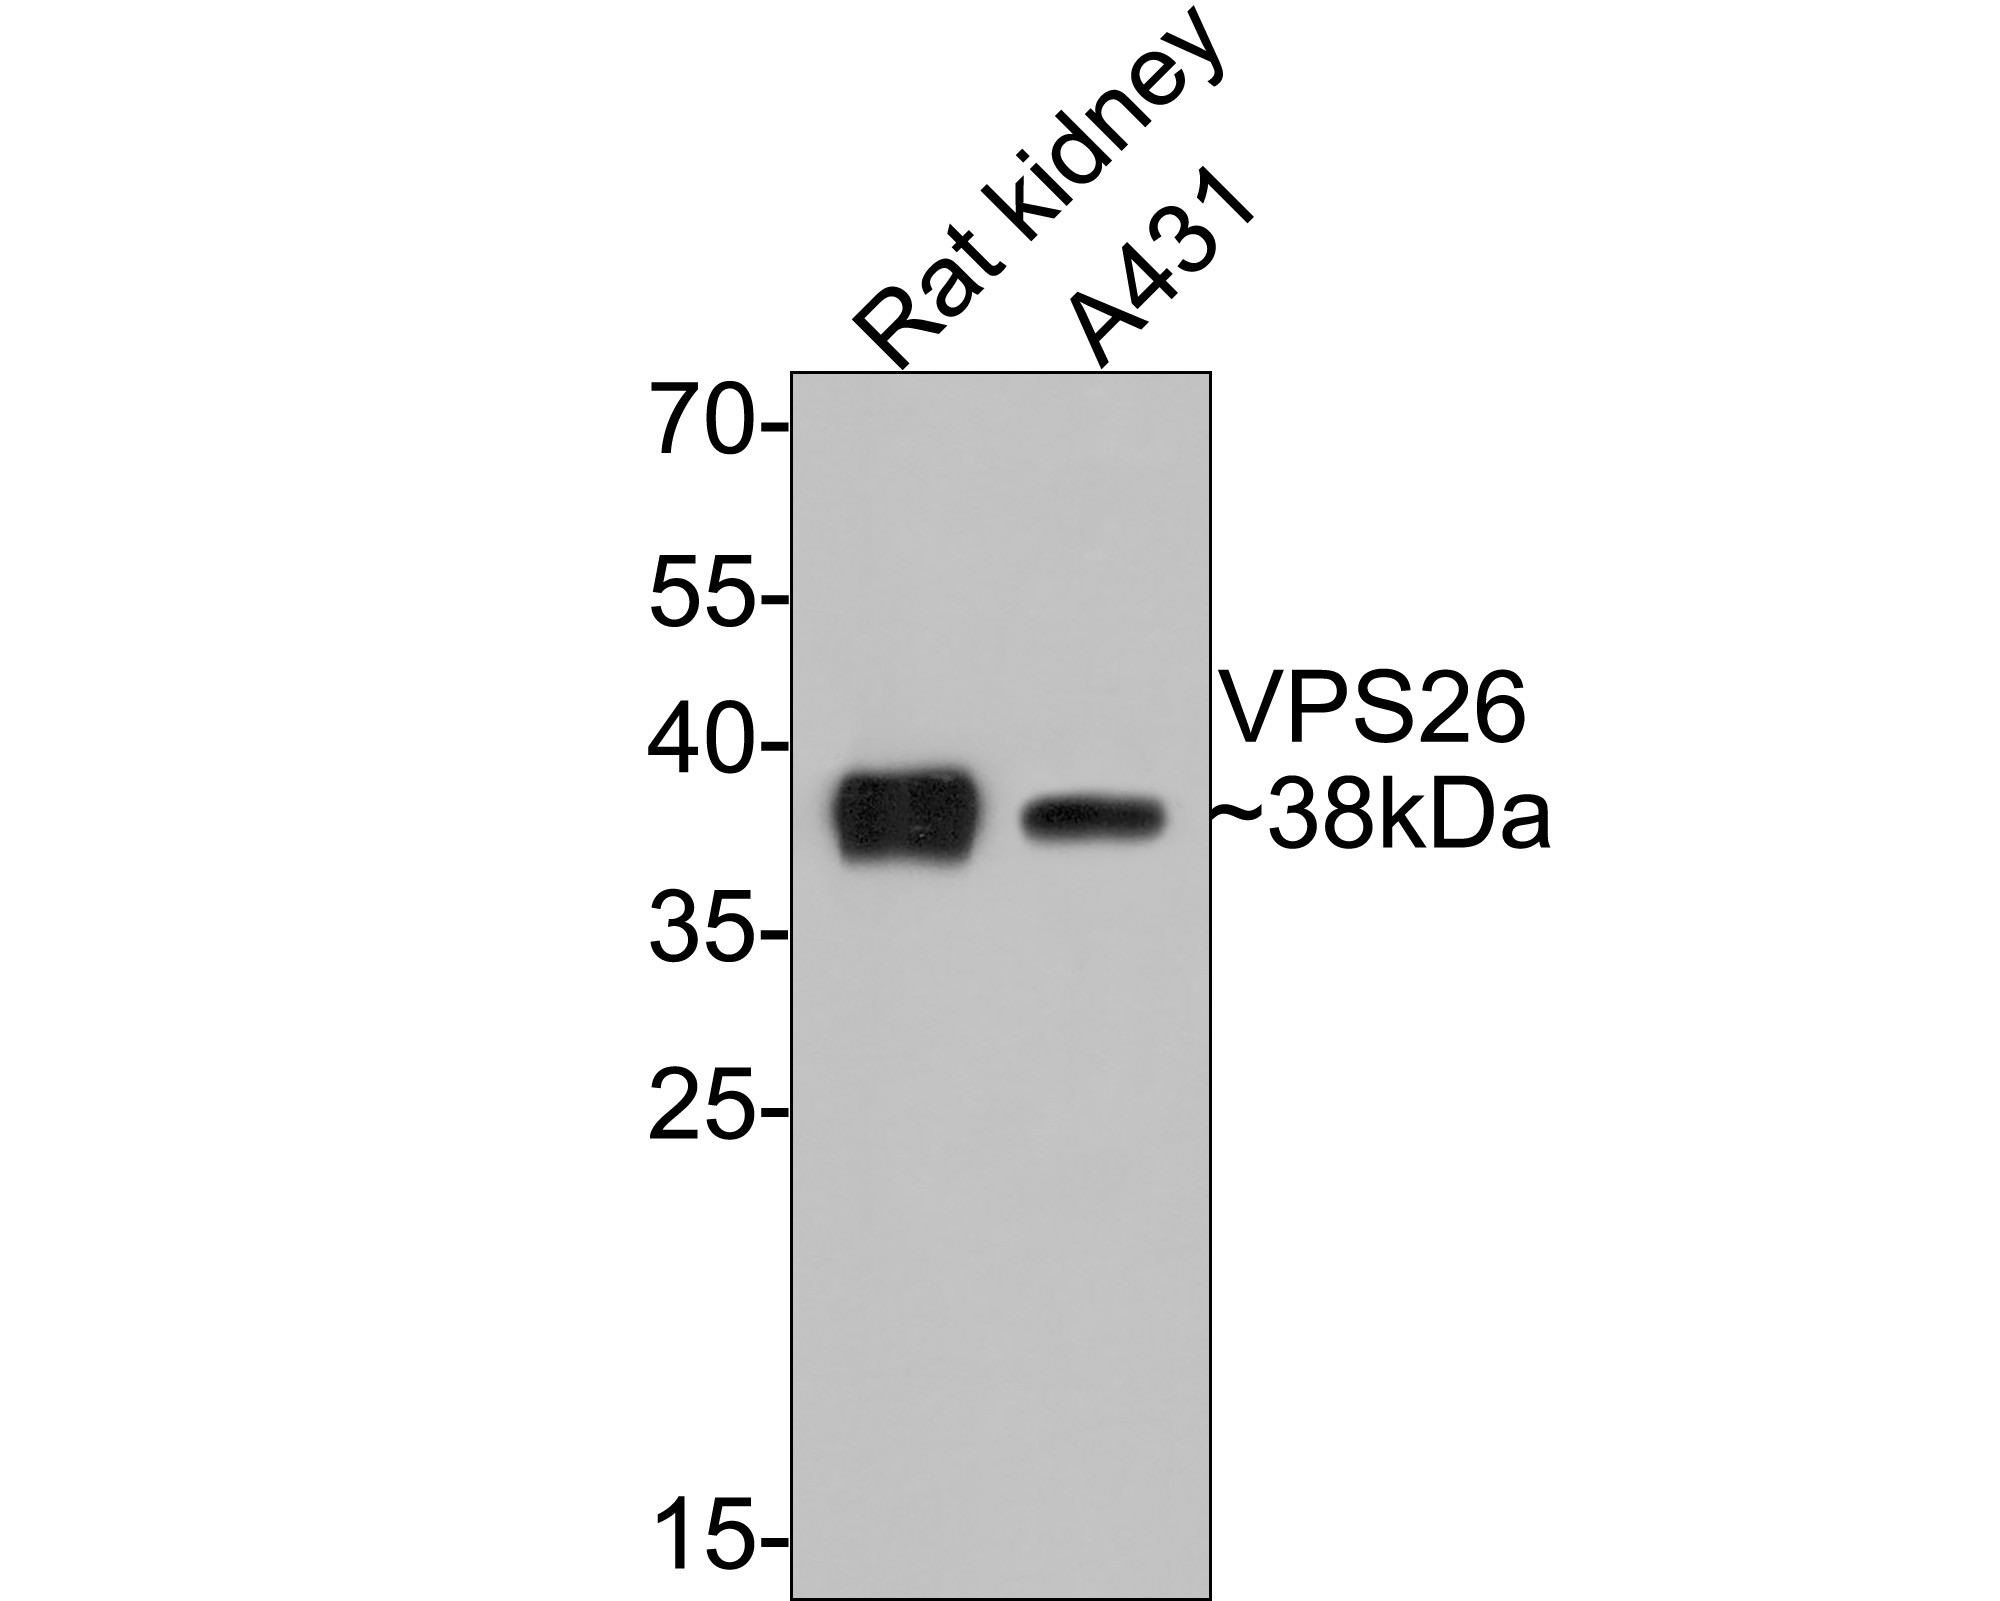 Western blot analysis of VPS26 on different lysates with Rabbit anti-VPS26 antibody (ET7107-21) at 1/500 dilution.<br />
<br />
Lane 1: Human liver tissue lysate (20 µg/Lane)<br />
Lane 2: Hela cell lysate (10 µg/Lane)<br />
<br />
Predicted band size: 38 kDa<br />
Observed band size: 38 kDa<br />
<br />
Exposure time: 2 minutes;<br />
<br />
12% SDS-PAGE gel.<br />
<br />
Proteins were transferred to a PVDF membrane and blocked with 5% NFDM/TBST for 1 hour at room temperature. The primary antibody (ET7107-21) at 1/500 dilution was used in 5% NFDM/TBST at room temperature for 2 hours. Goat Anti-Rabbit IgG - HRP Secondary Antibody (HA1001) at 1:300,000 dilution was used for 1 hour at room temperature.